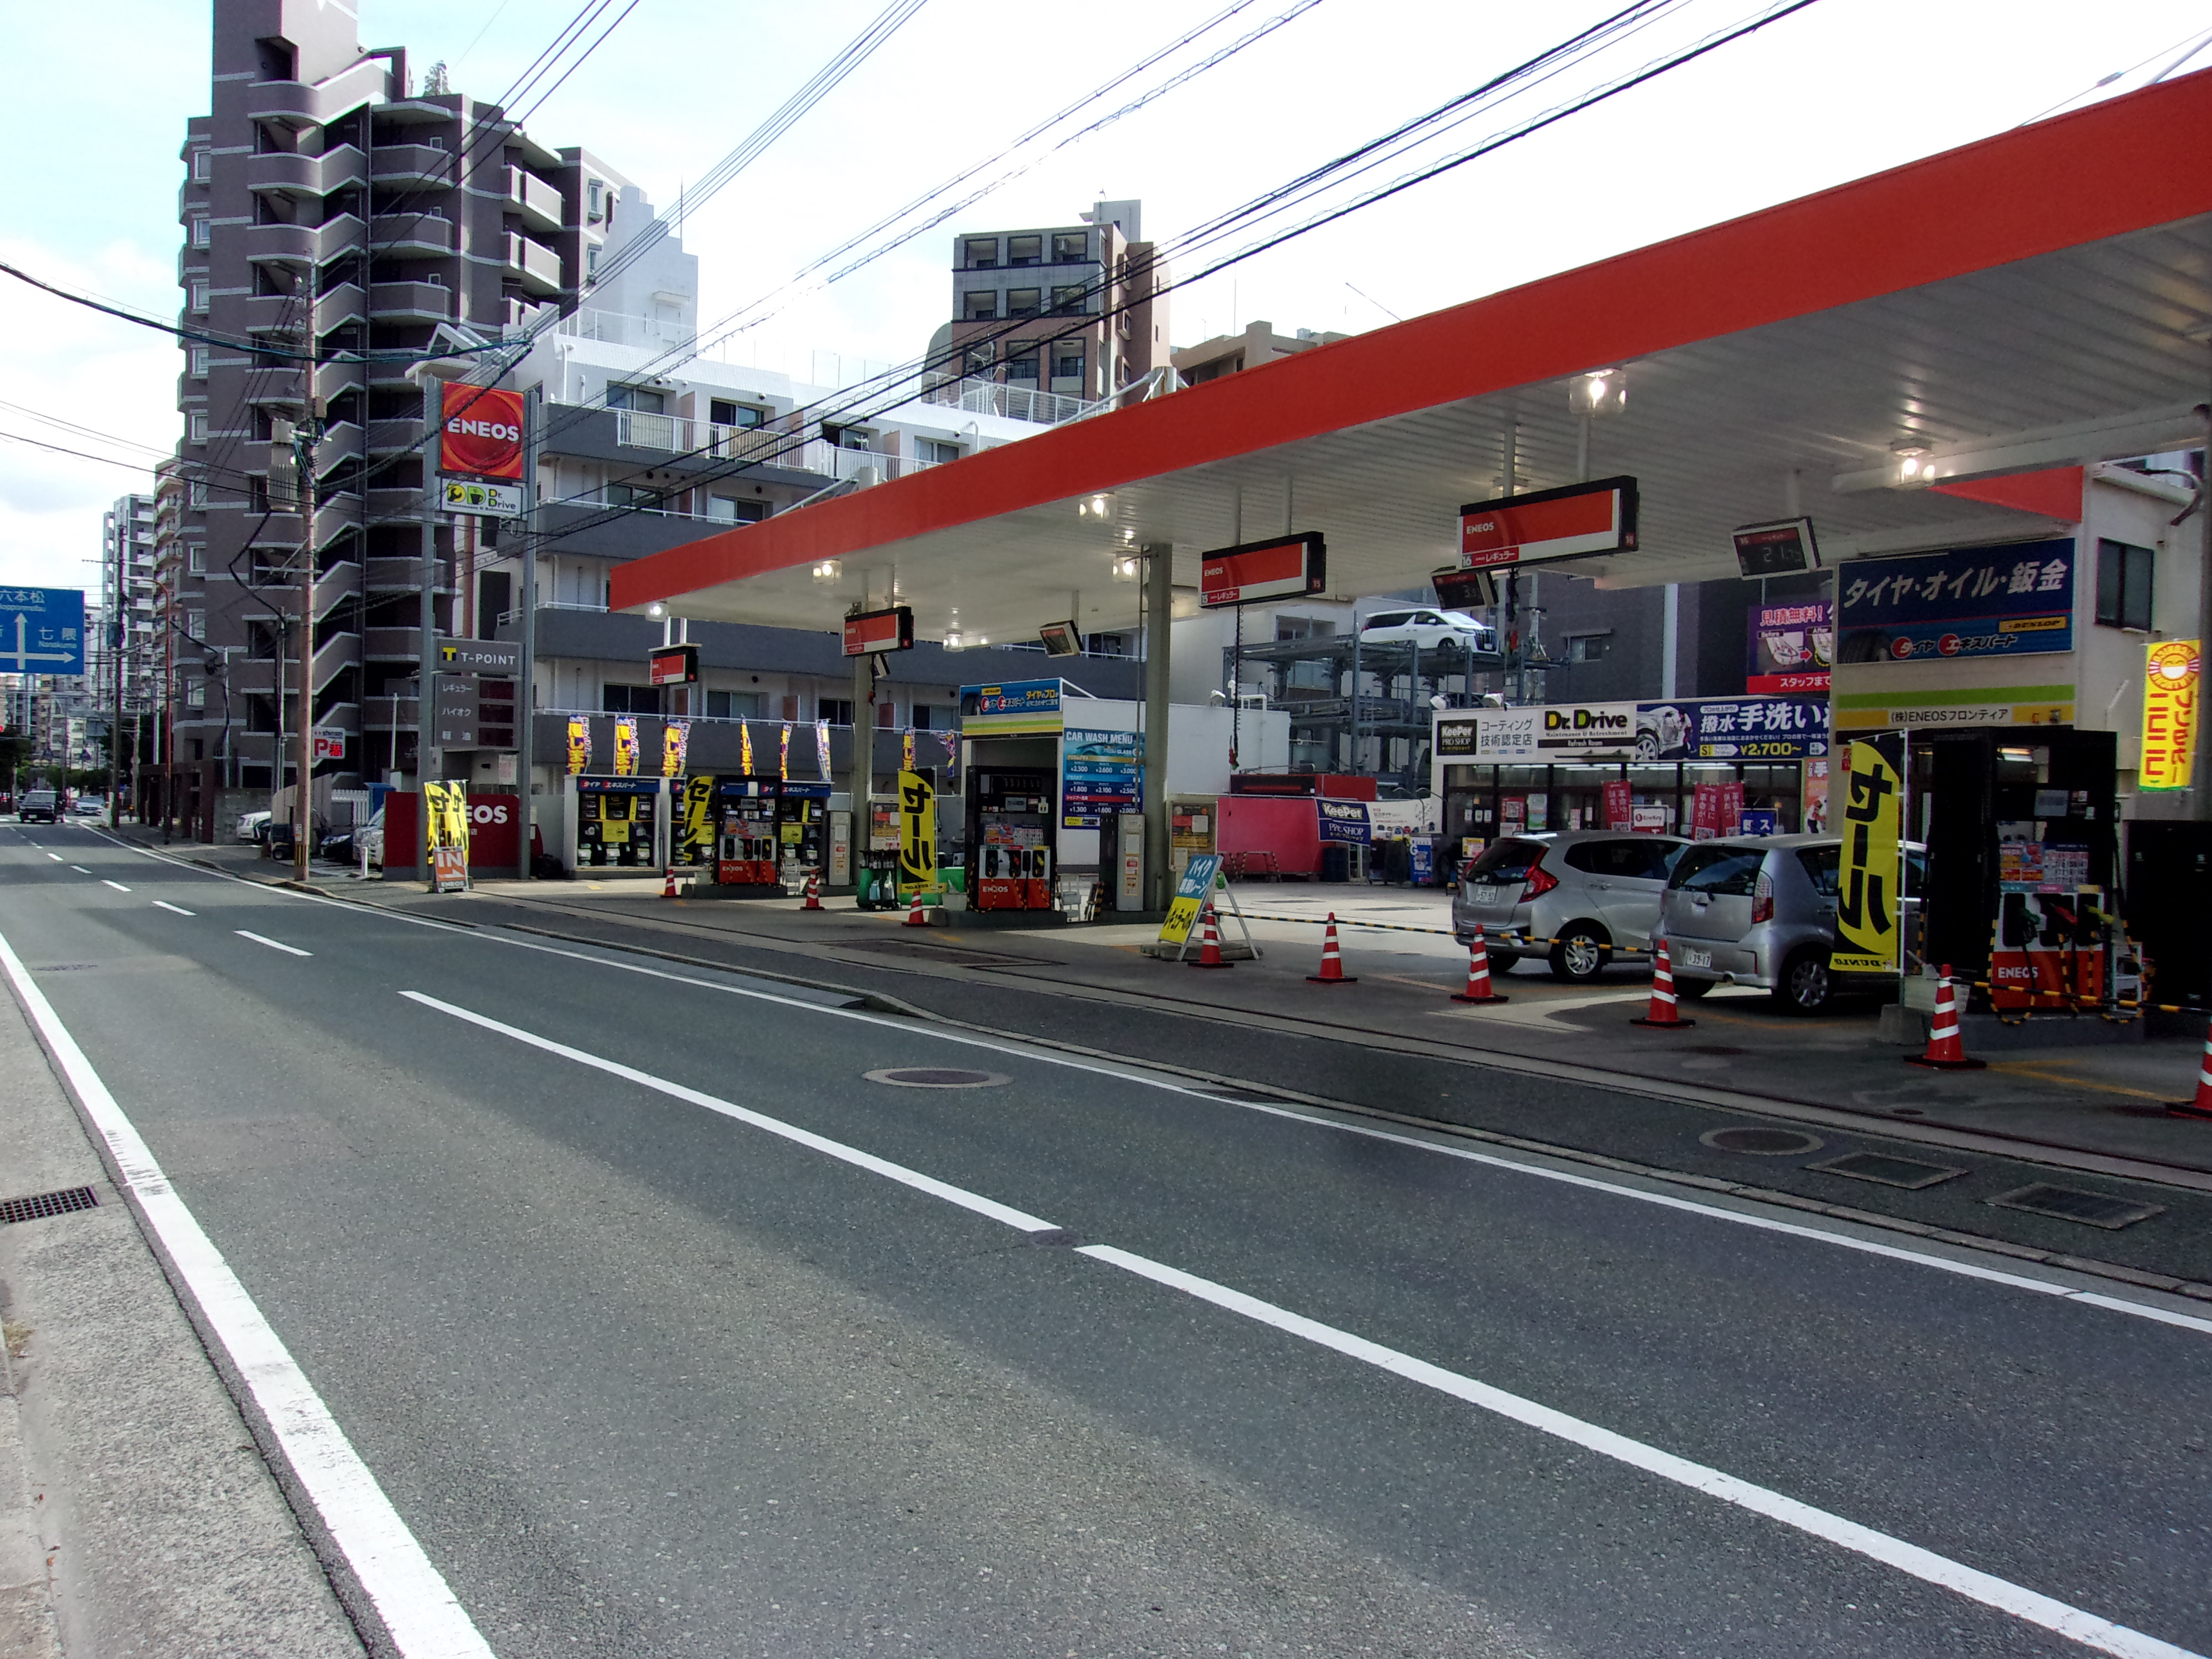 Images ENEOS Dr.Drive城南店(ENEOSフロンティア)